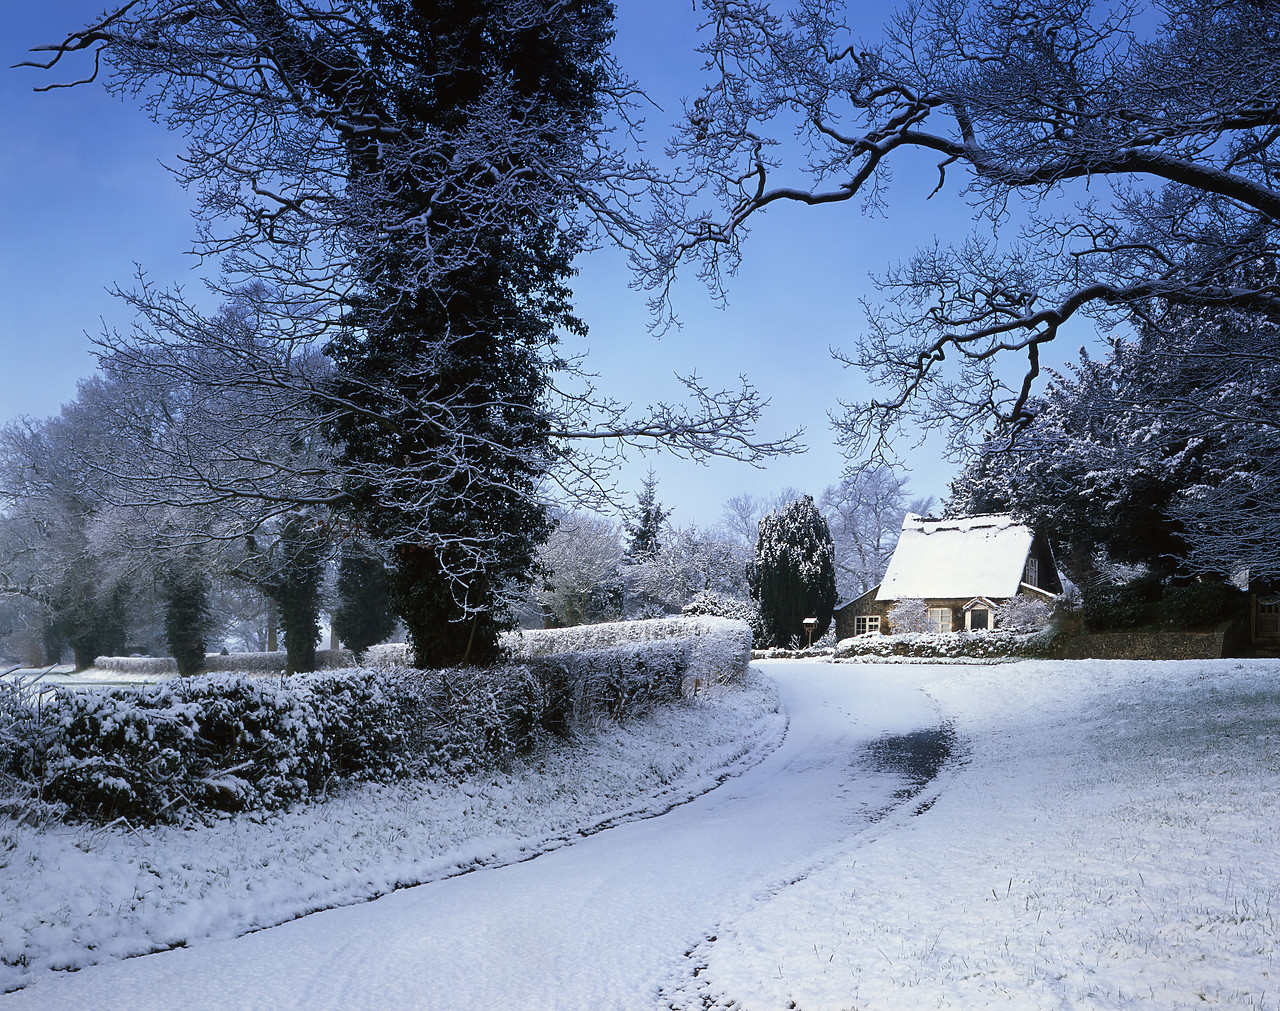 #040060-2 - Country Lane & Cottage in Winter, Intwood, Norfolk, England